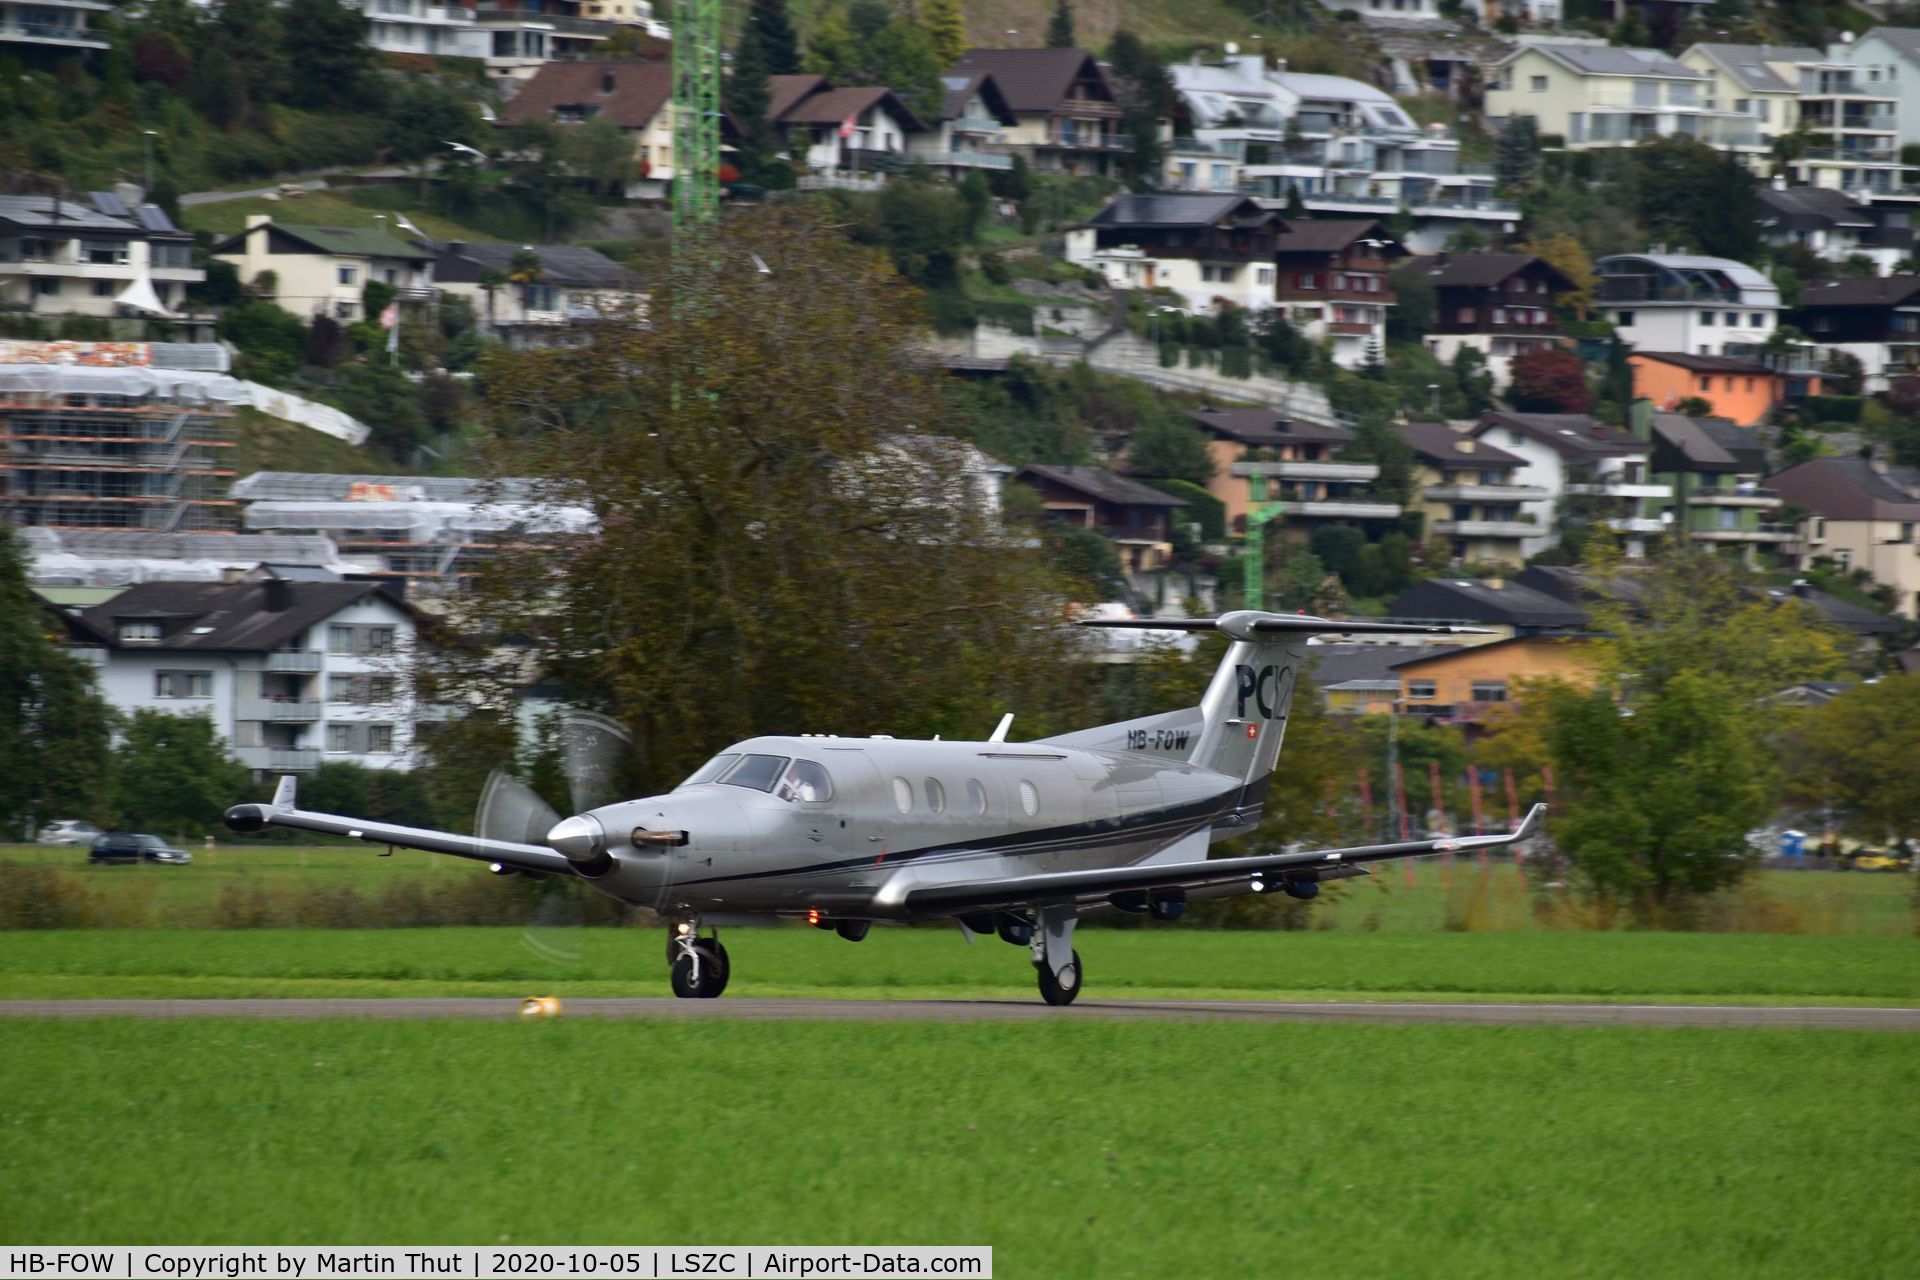 HB-FOW, 2001 Pilatus PC-12/45 C/N 411, HB-FOW takeoff to Lahr Germany